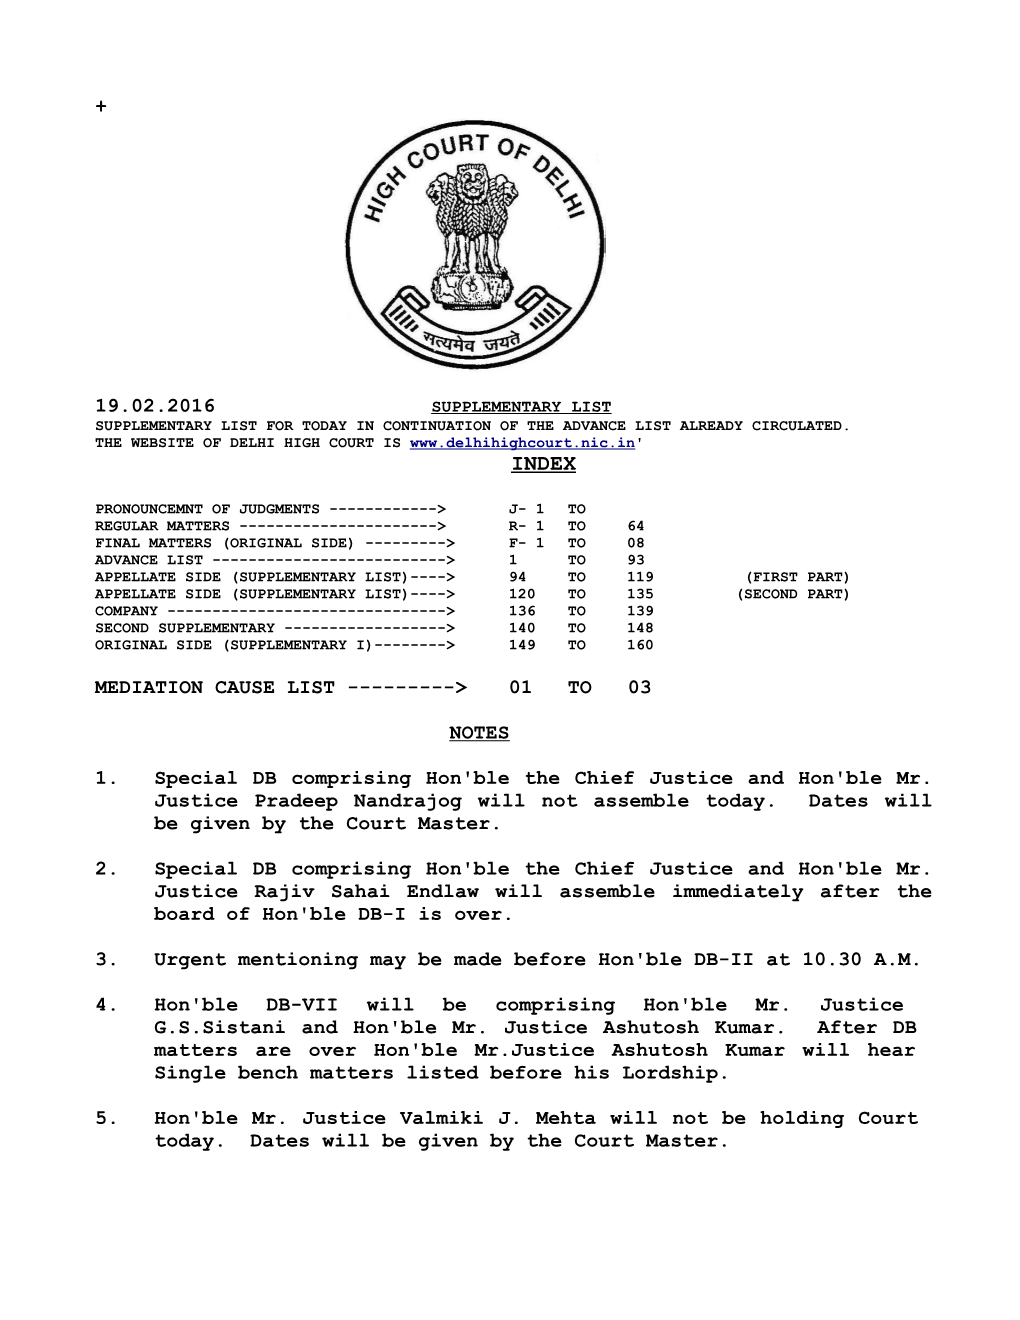 01 to 03 NOTES 1. Special DB Comprising Hon'ble the Chief